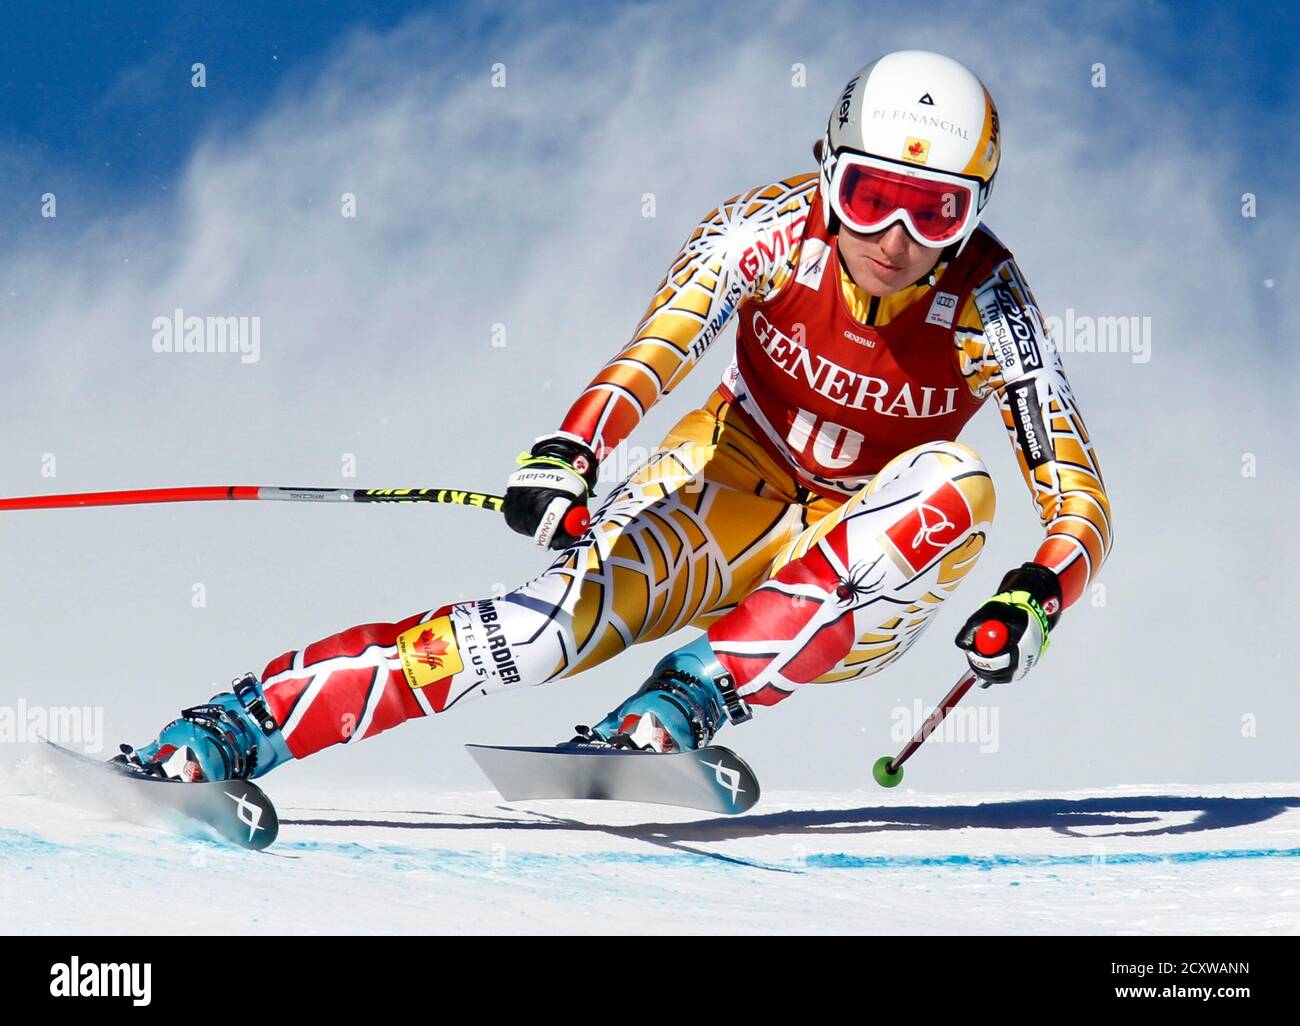 Britt Janyk of Canada makes a turn during alpine skiing at the Women's World Cup Downhill in Lake Louise, Alberta December 4, 2010.  REUTERS/Mike Blake    (CANADA - Tags: SPORT SKIING) Stock Photo